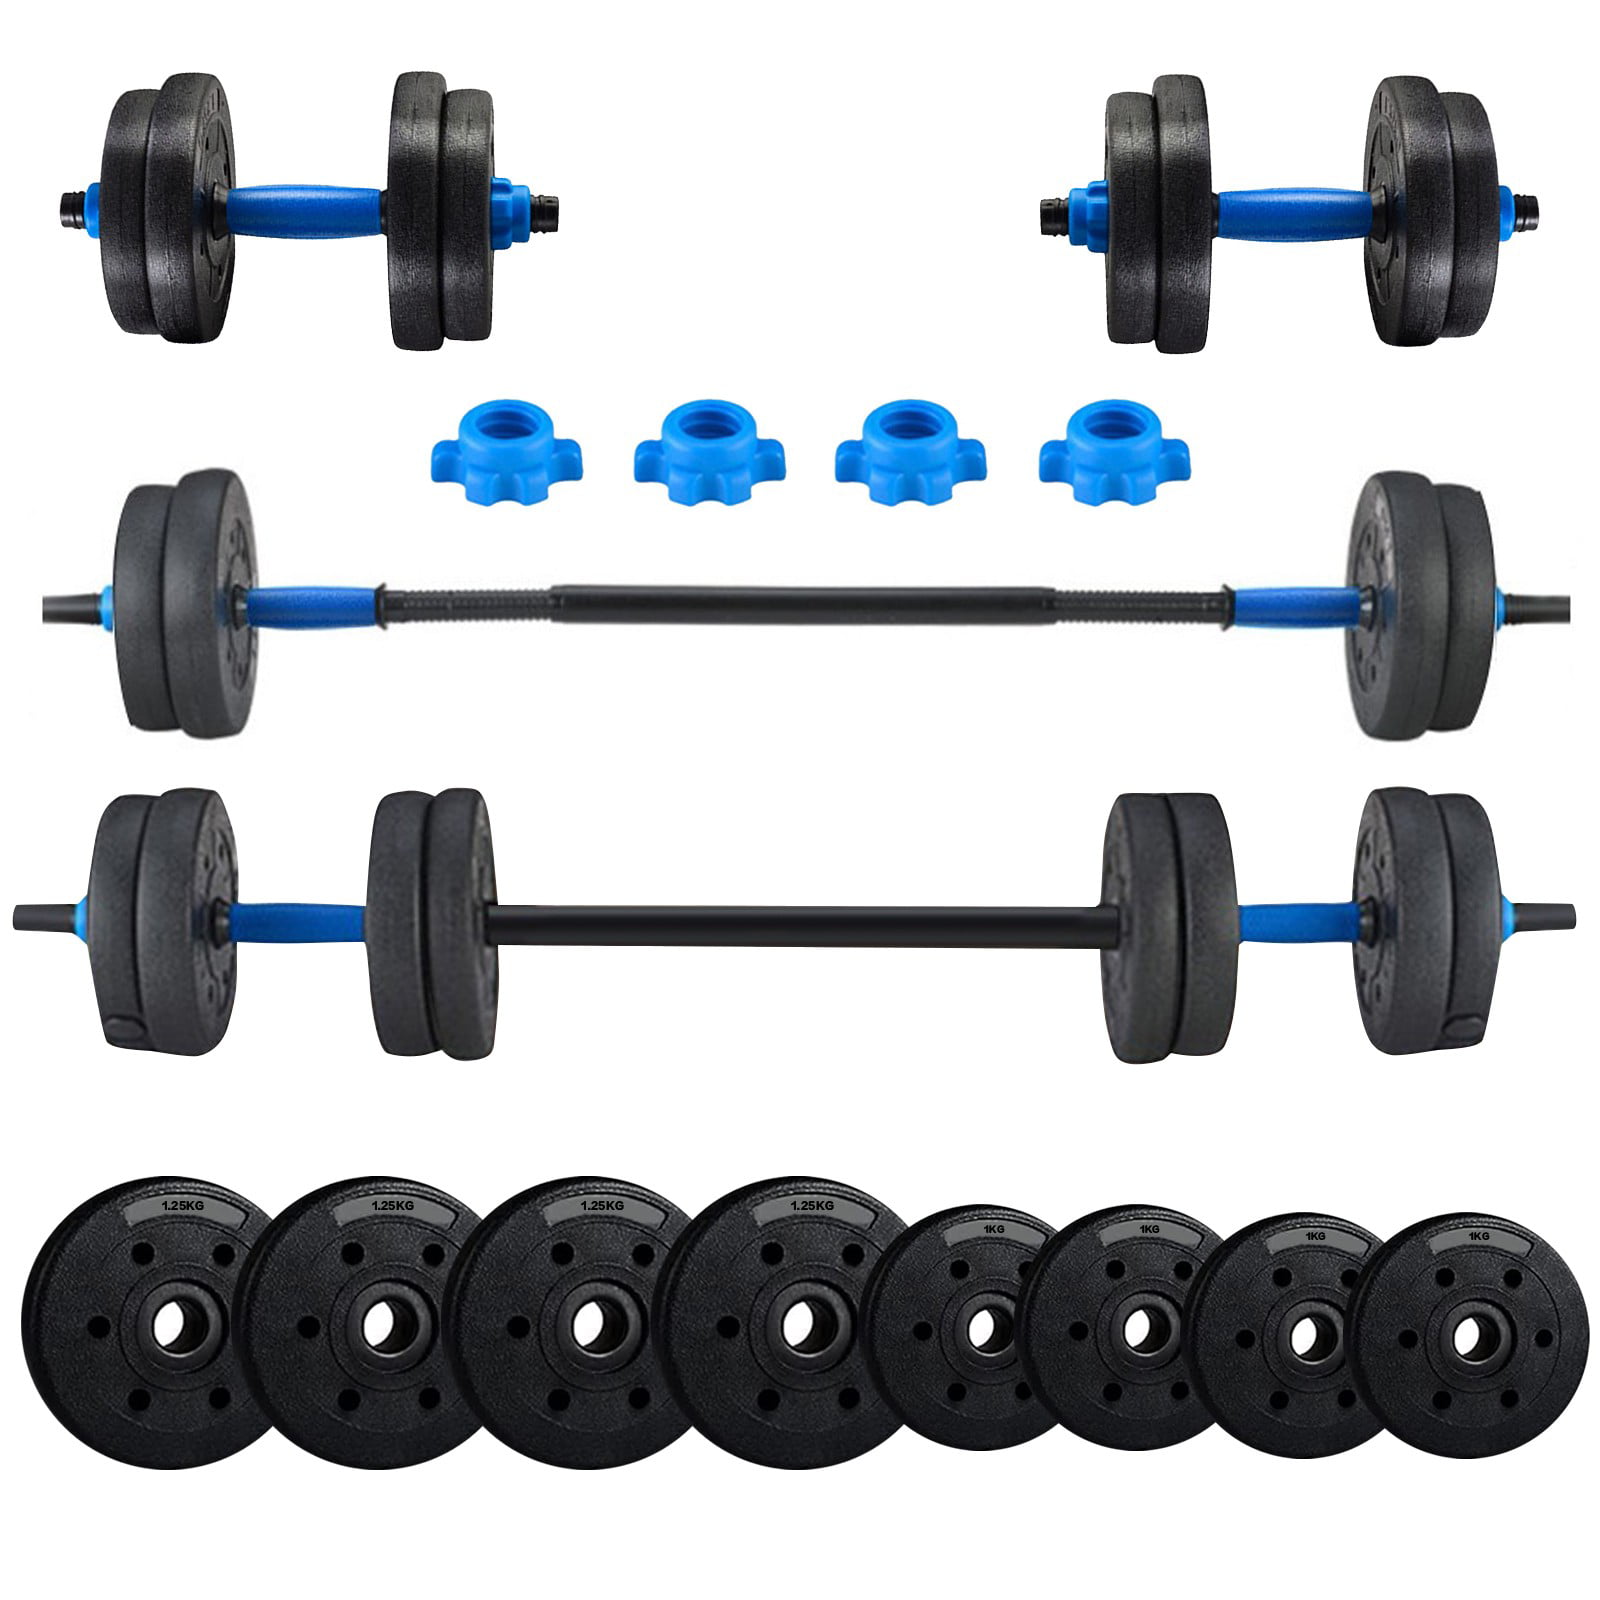 2-IN-1 Weight Dumbbell Set 110LBS Adjustable Cap Gym Barbell Plates Body Workout 